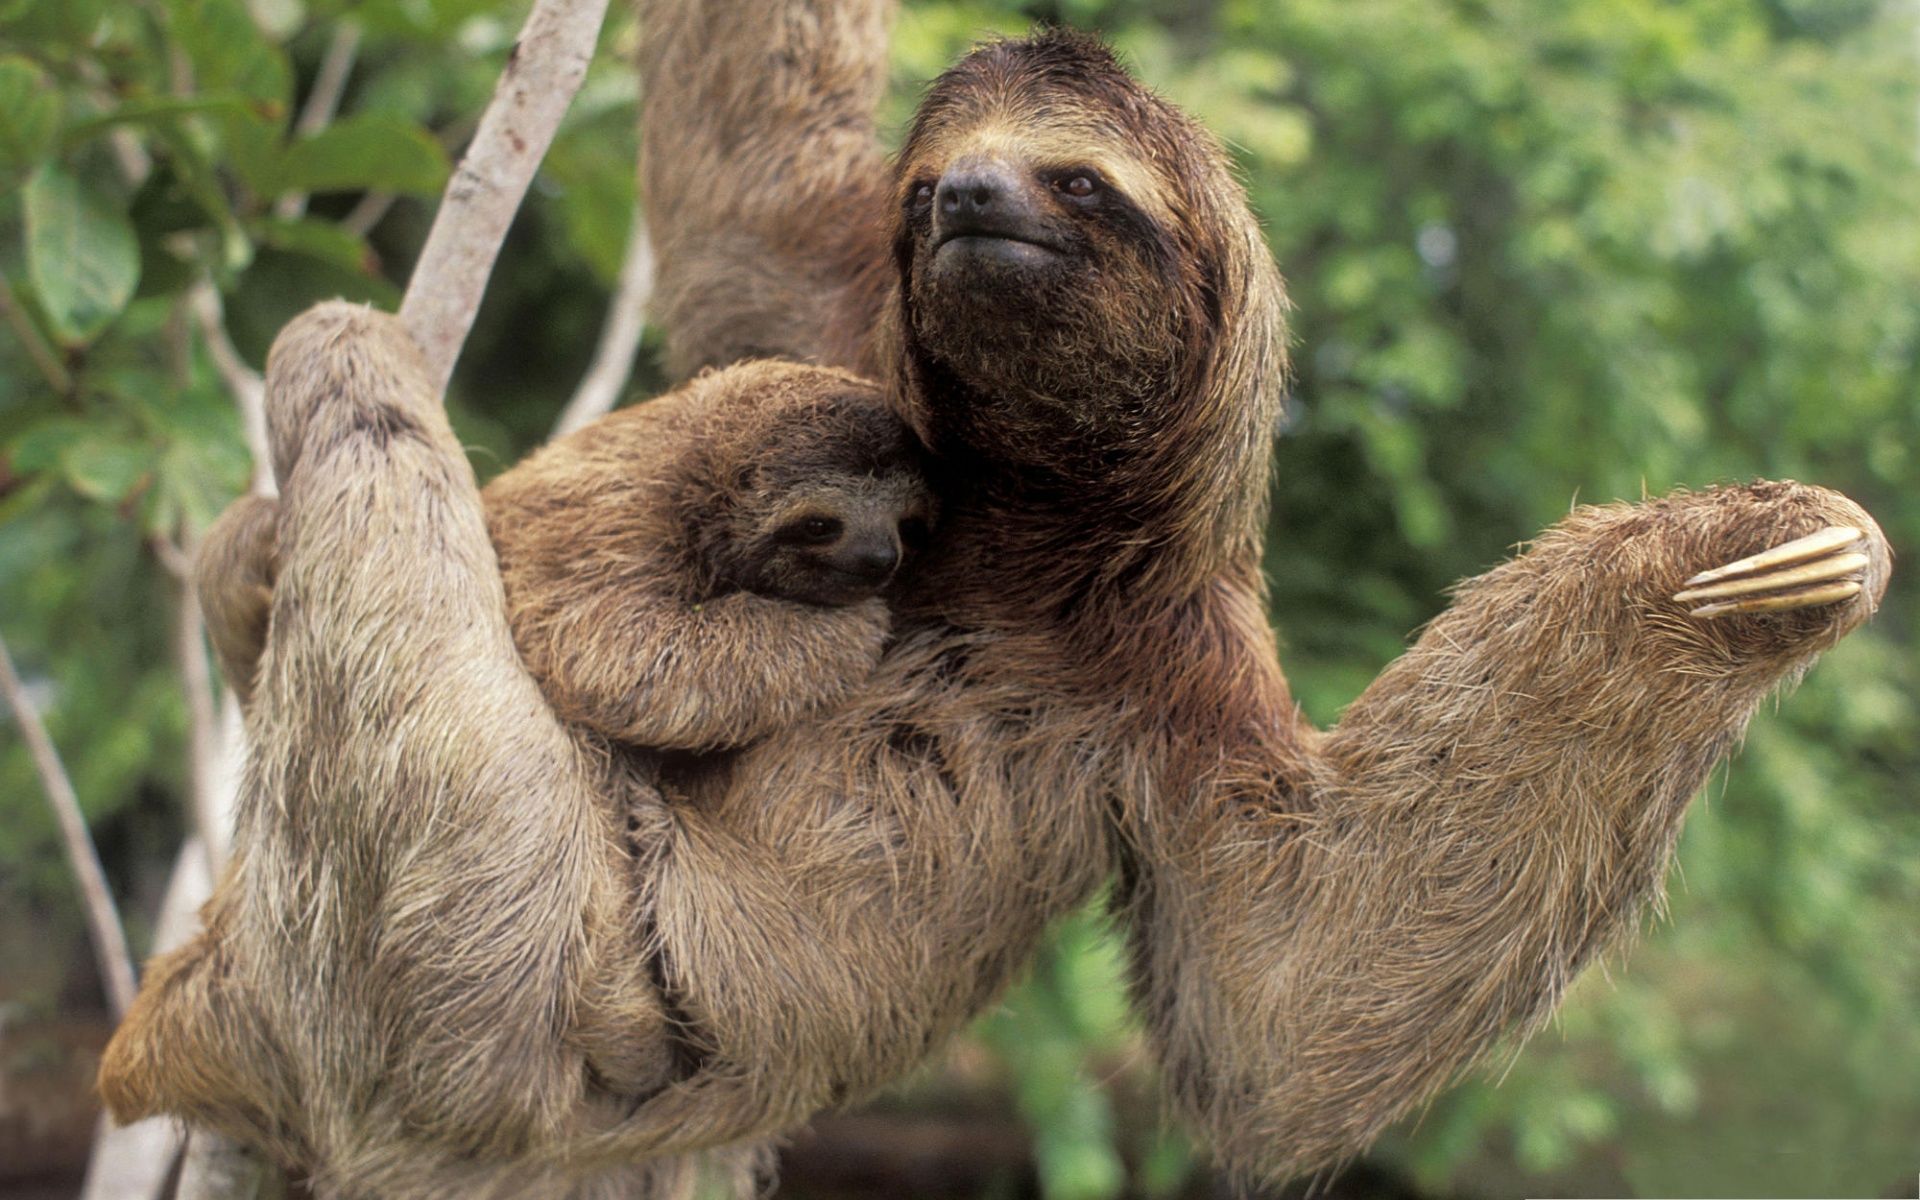 sloth arms stuffed animal, Picture of sloths, Three toed sloth